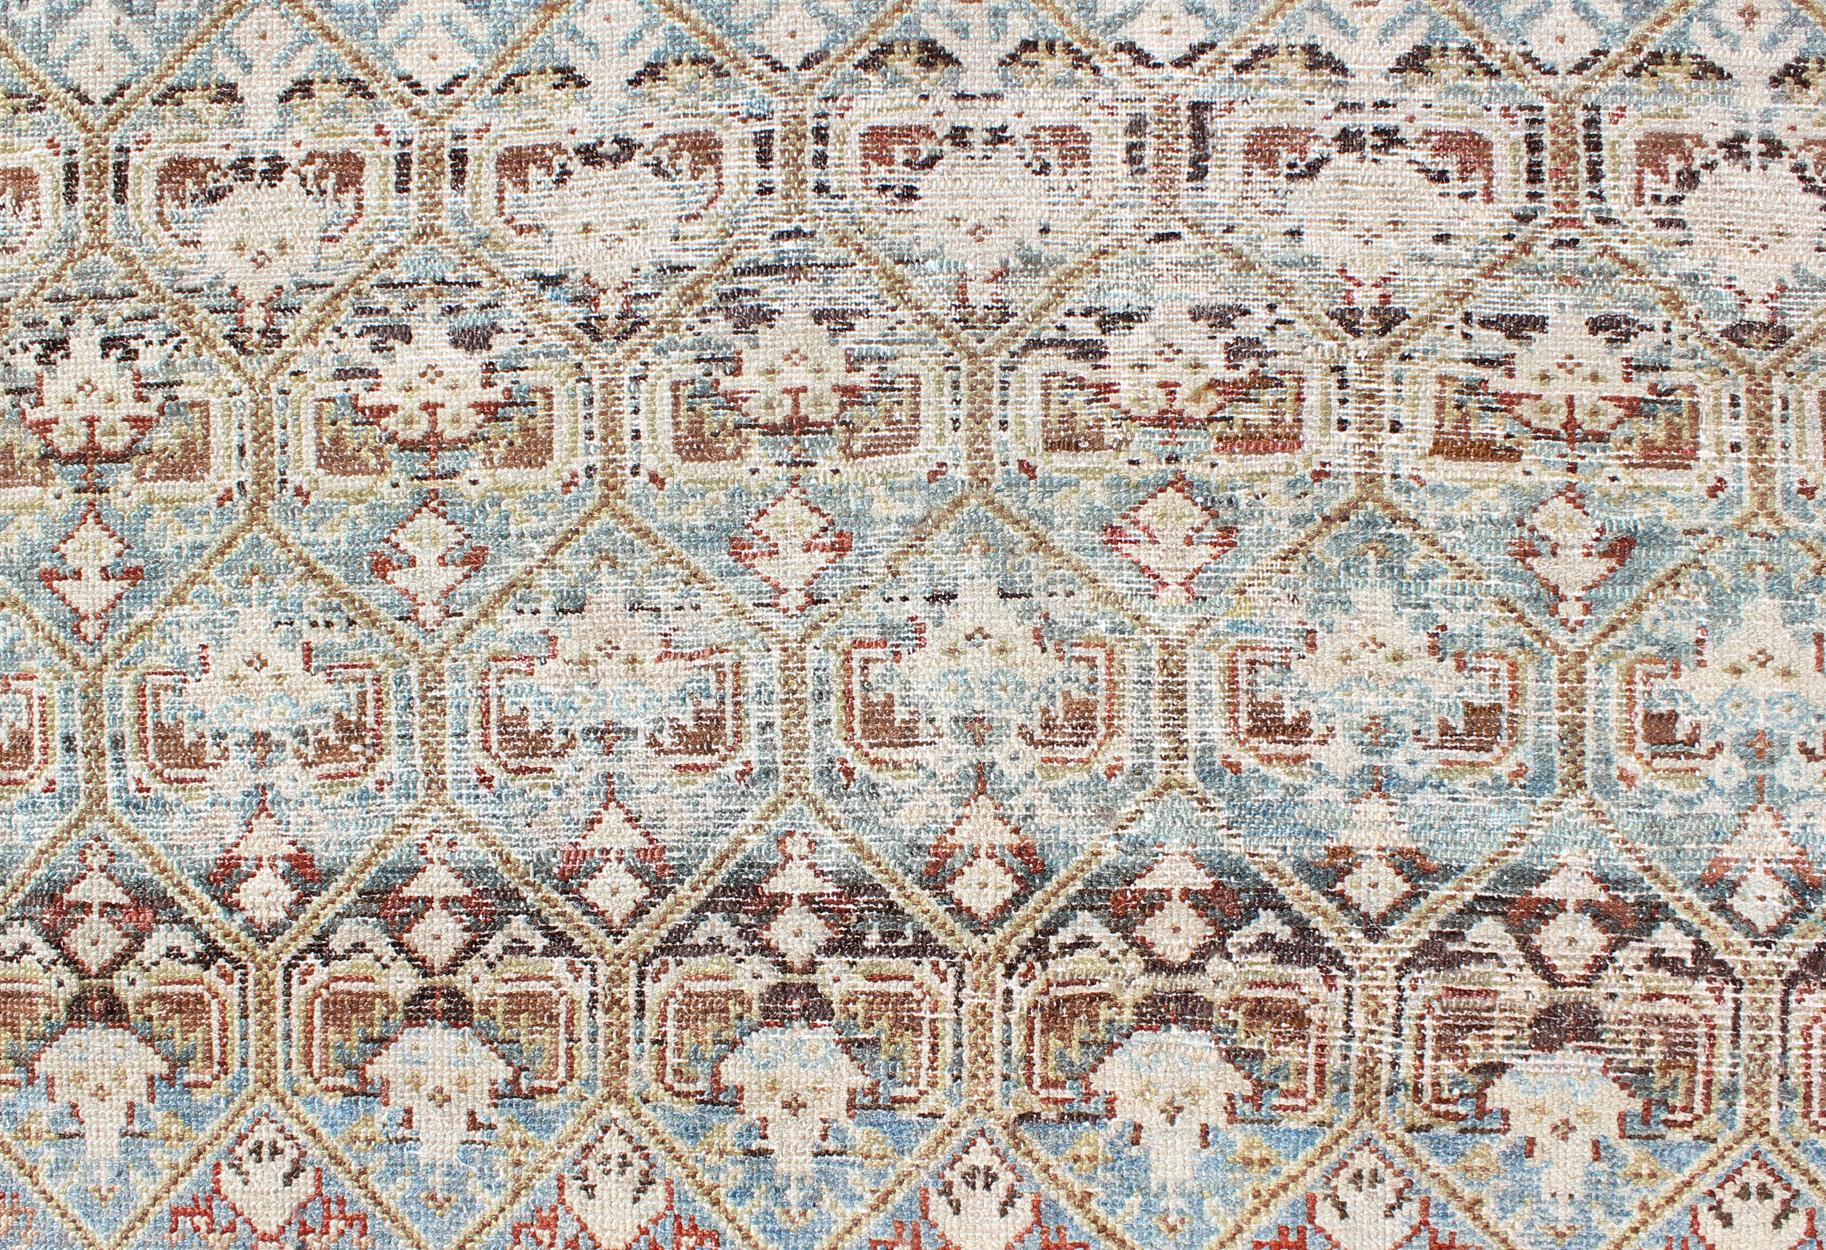 Early 20th Century Antique Persian Fine Senneh Distressed Rug with All-Over Geometric Design